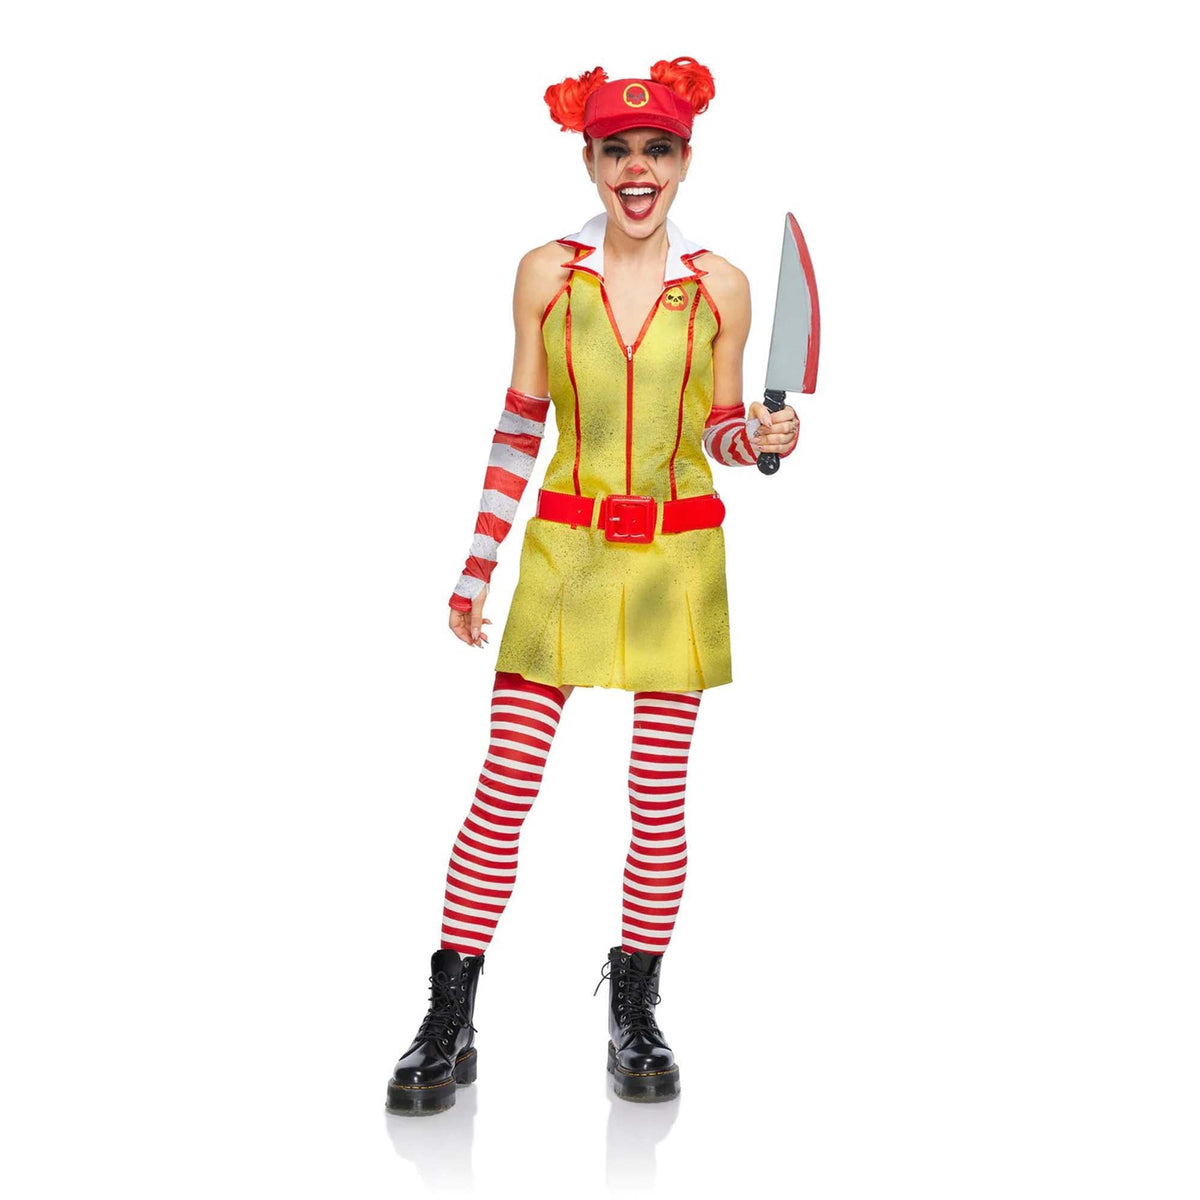 Seeing Red Inc. Costumes Evil Fast Food Clown Costume for Adults, Yellow and Red Dress